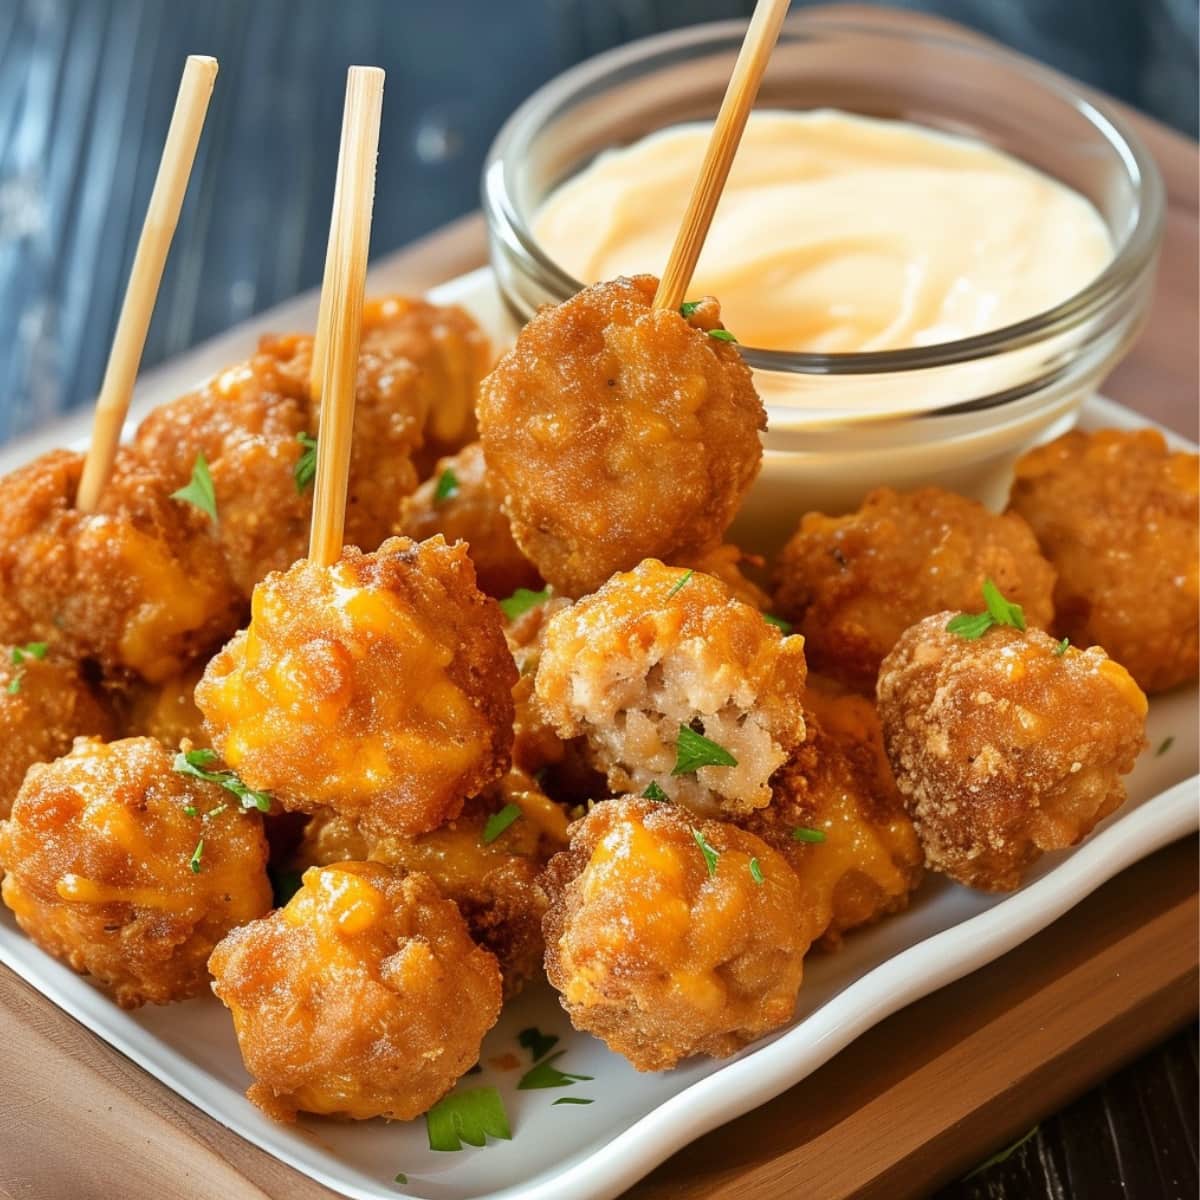 Delicious cheddar bay sausage balls with dipping sauce